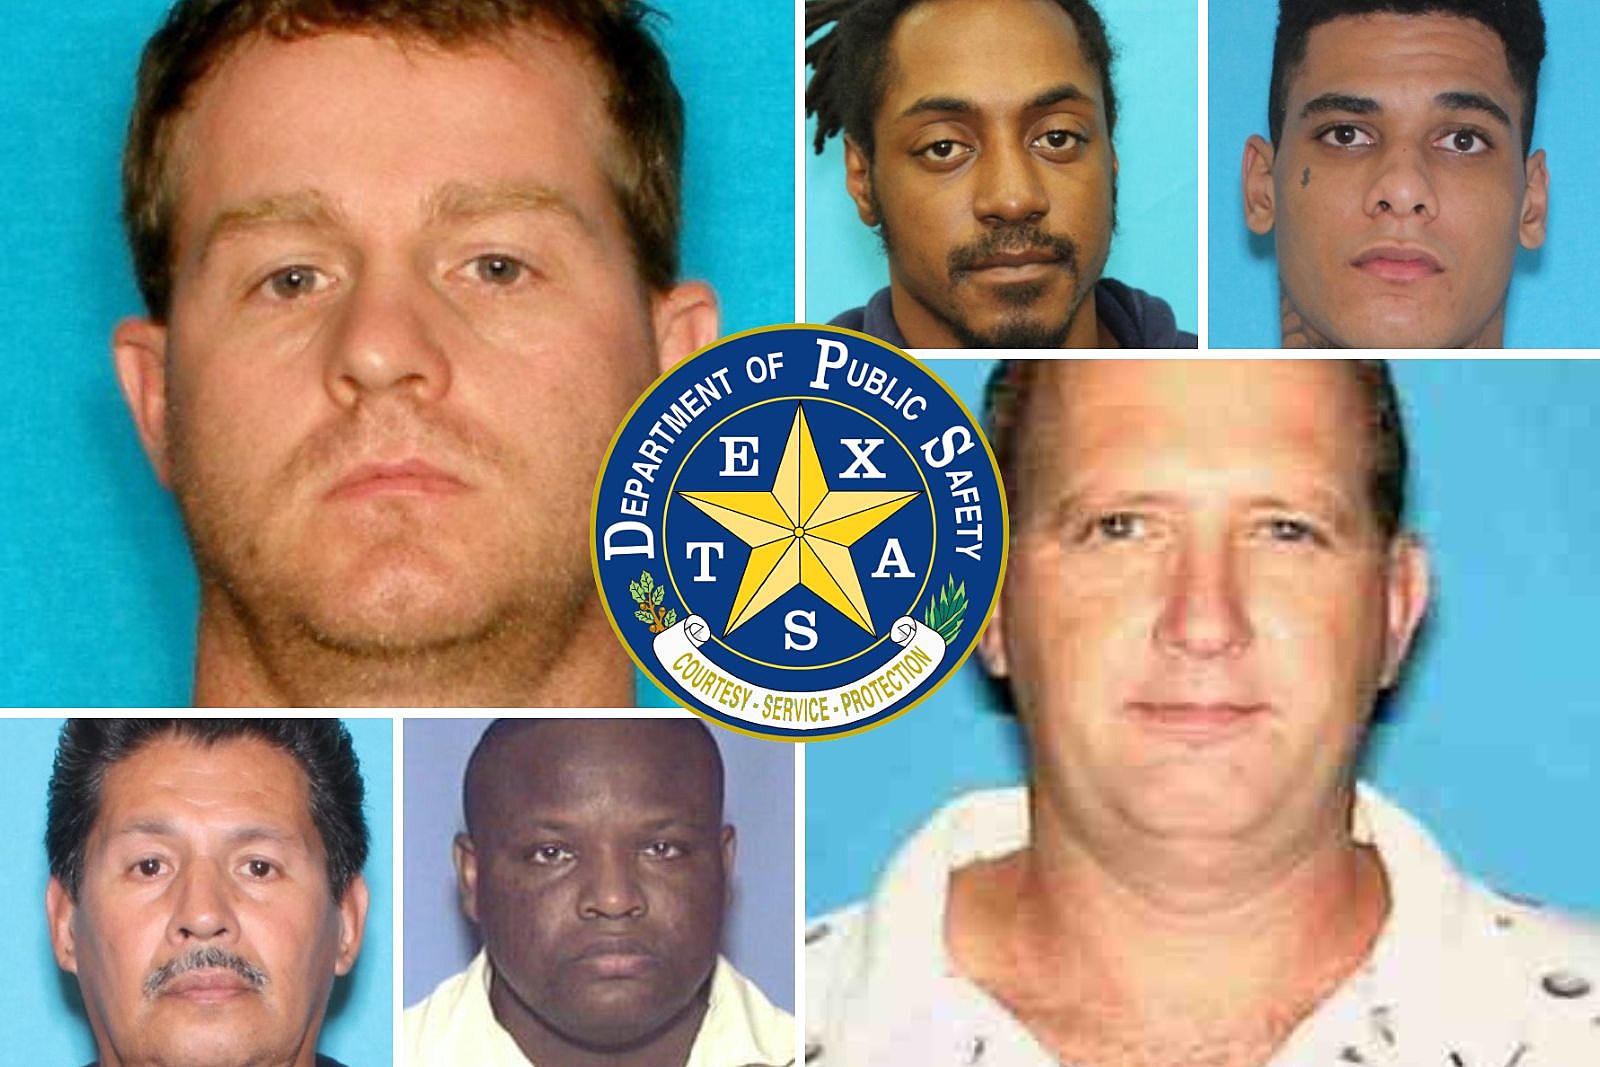 Two Dudes Were Added To Texas 10 Most Wanted Sex Offenders List